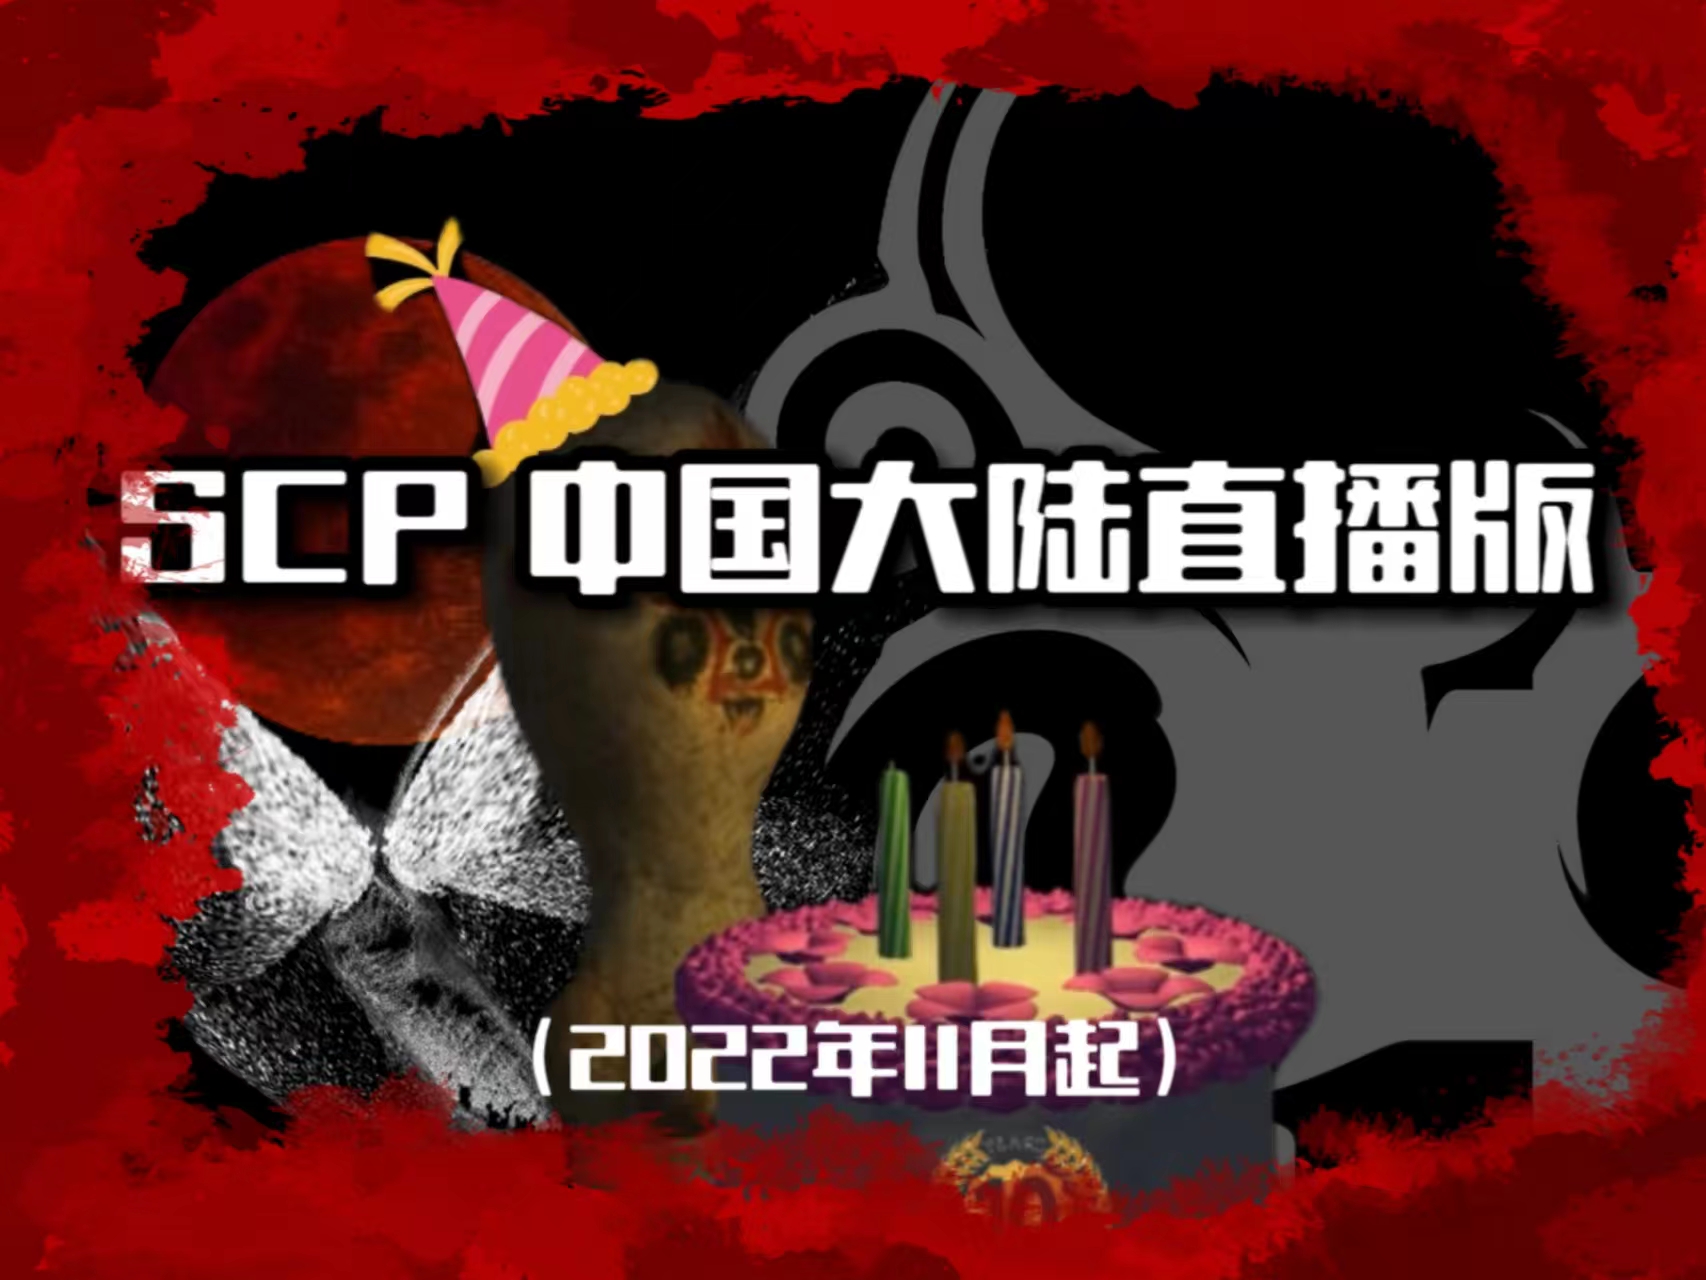 Image 6 - SCP - Chinese Mainland Live Edition mod for SCP - Containment  Breach - Mod DB